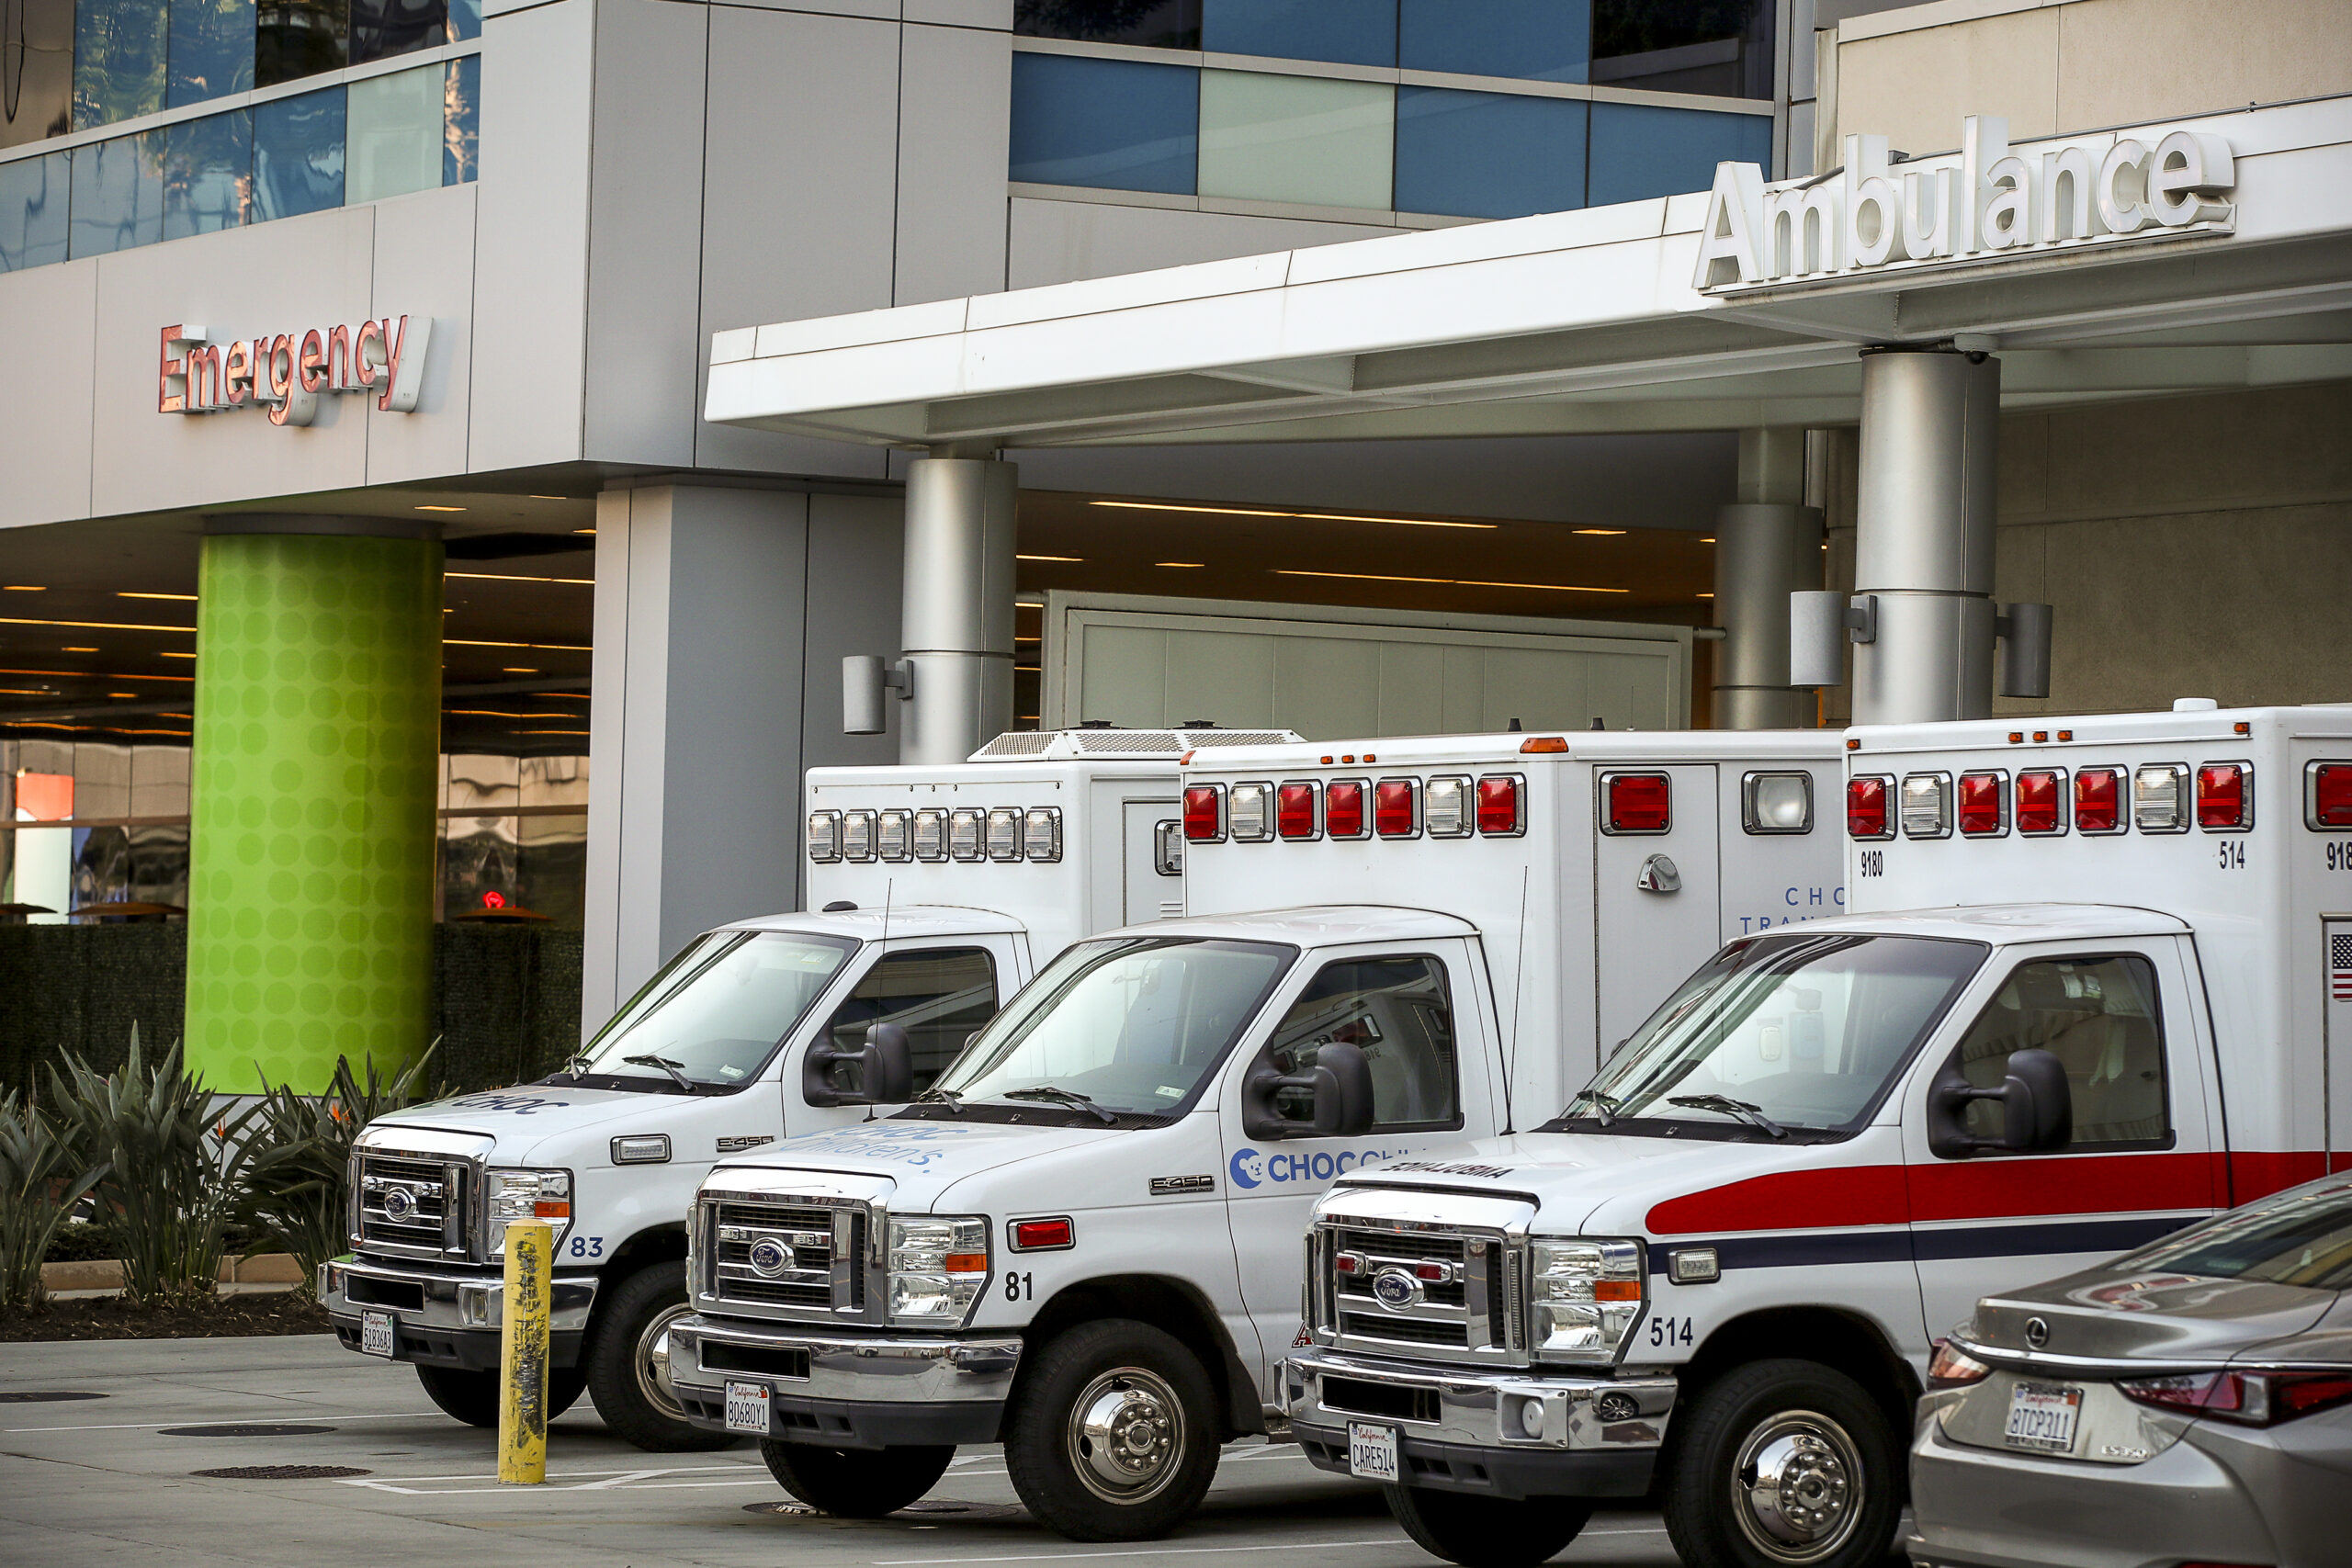 The Orange County Health Officer issued a Declaration of Health Emergency in Orange County due to rapidly spreading virus infections causing record numbers of pediatric hospitalizations and daily emergency room visits